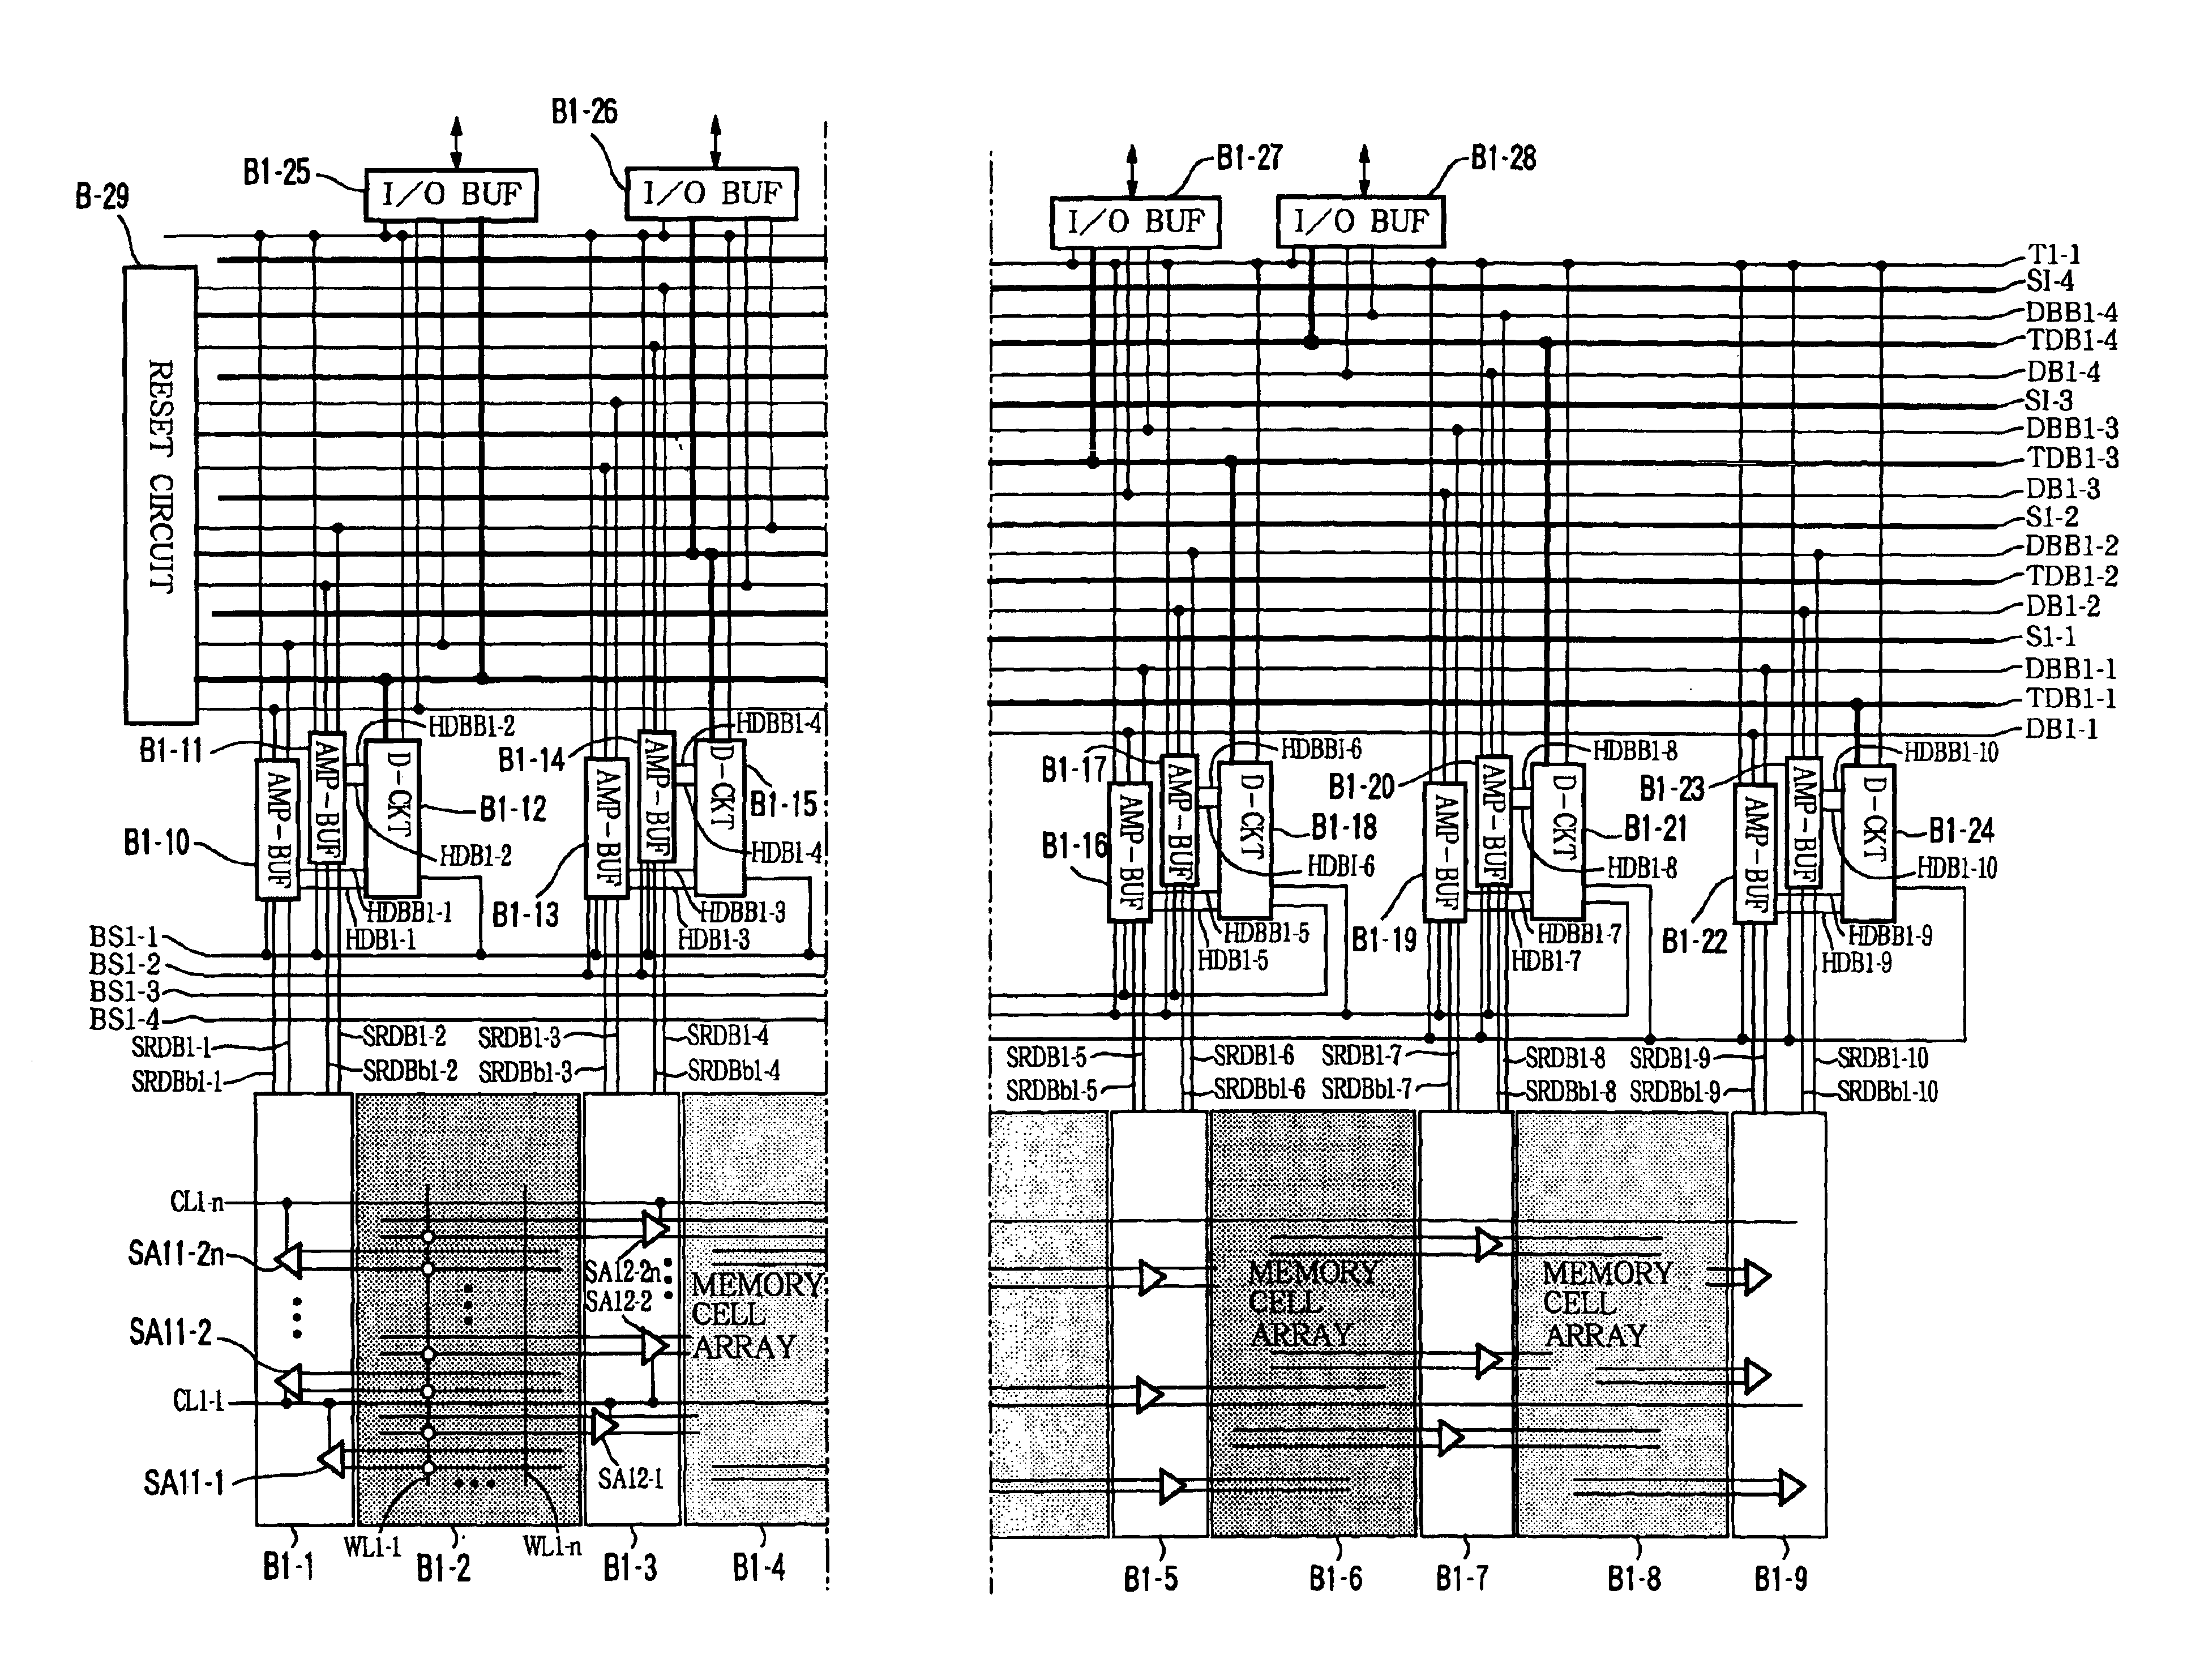 Rapidly testable semiconductor memory device